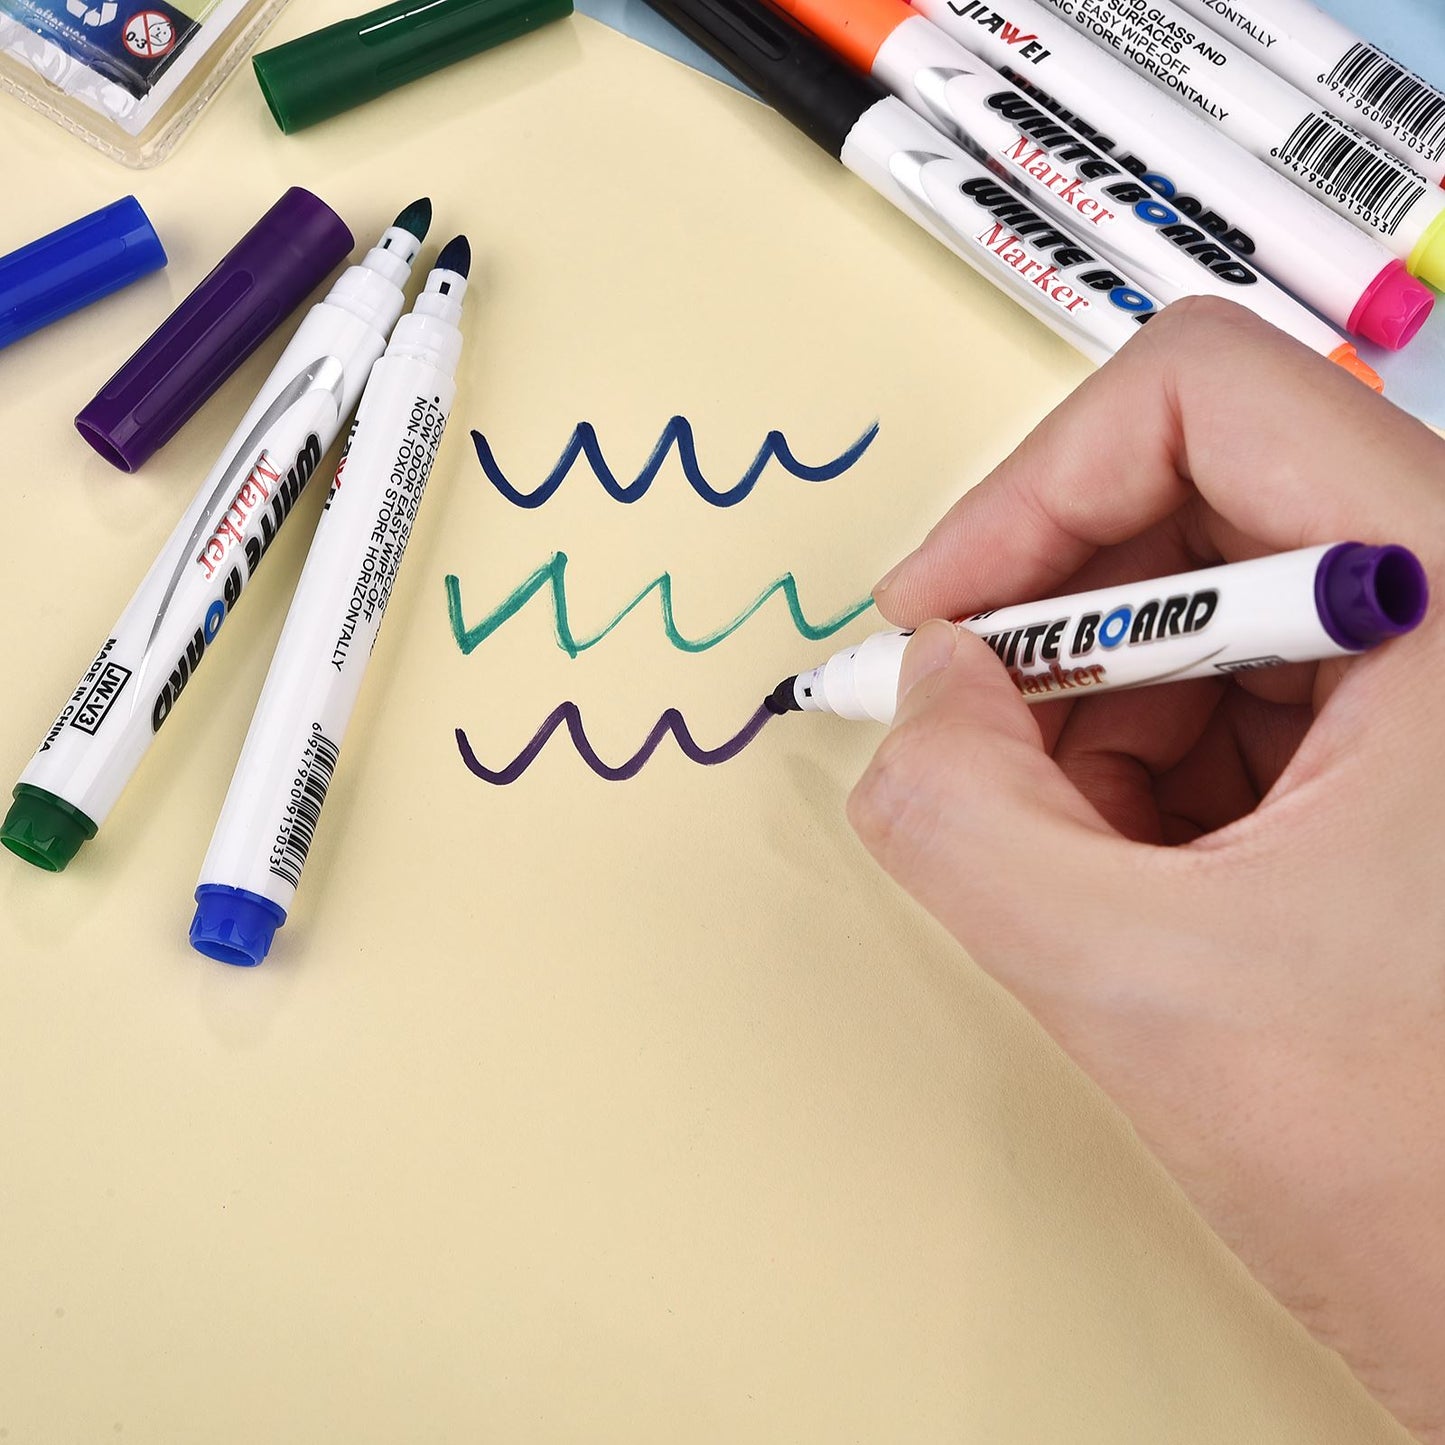 Magic Water Markers - Kids Floating Painting